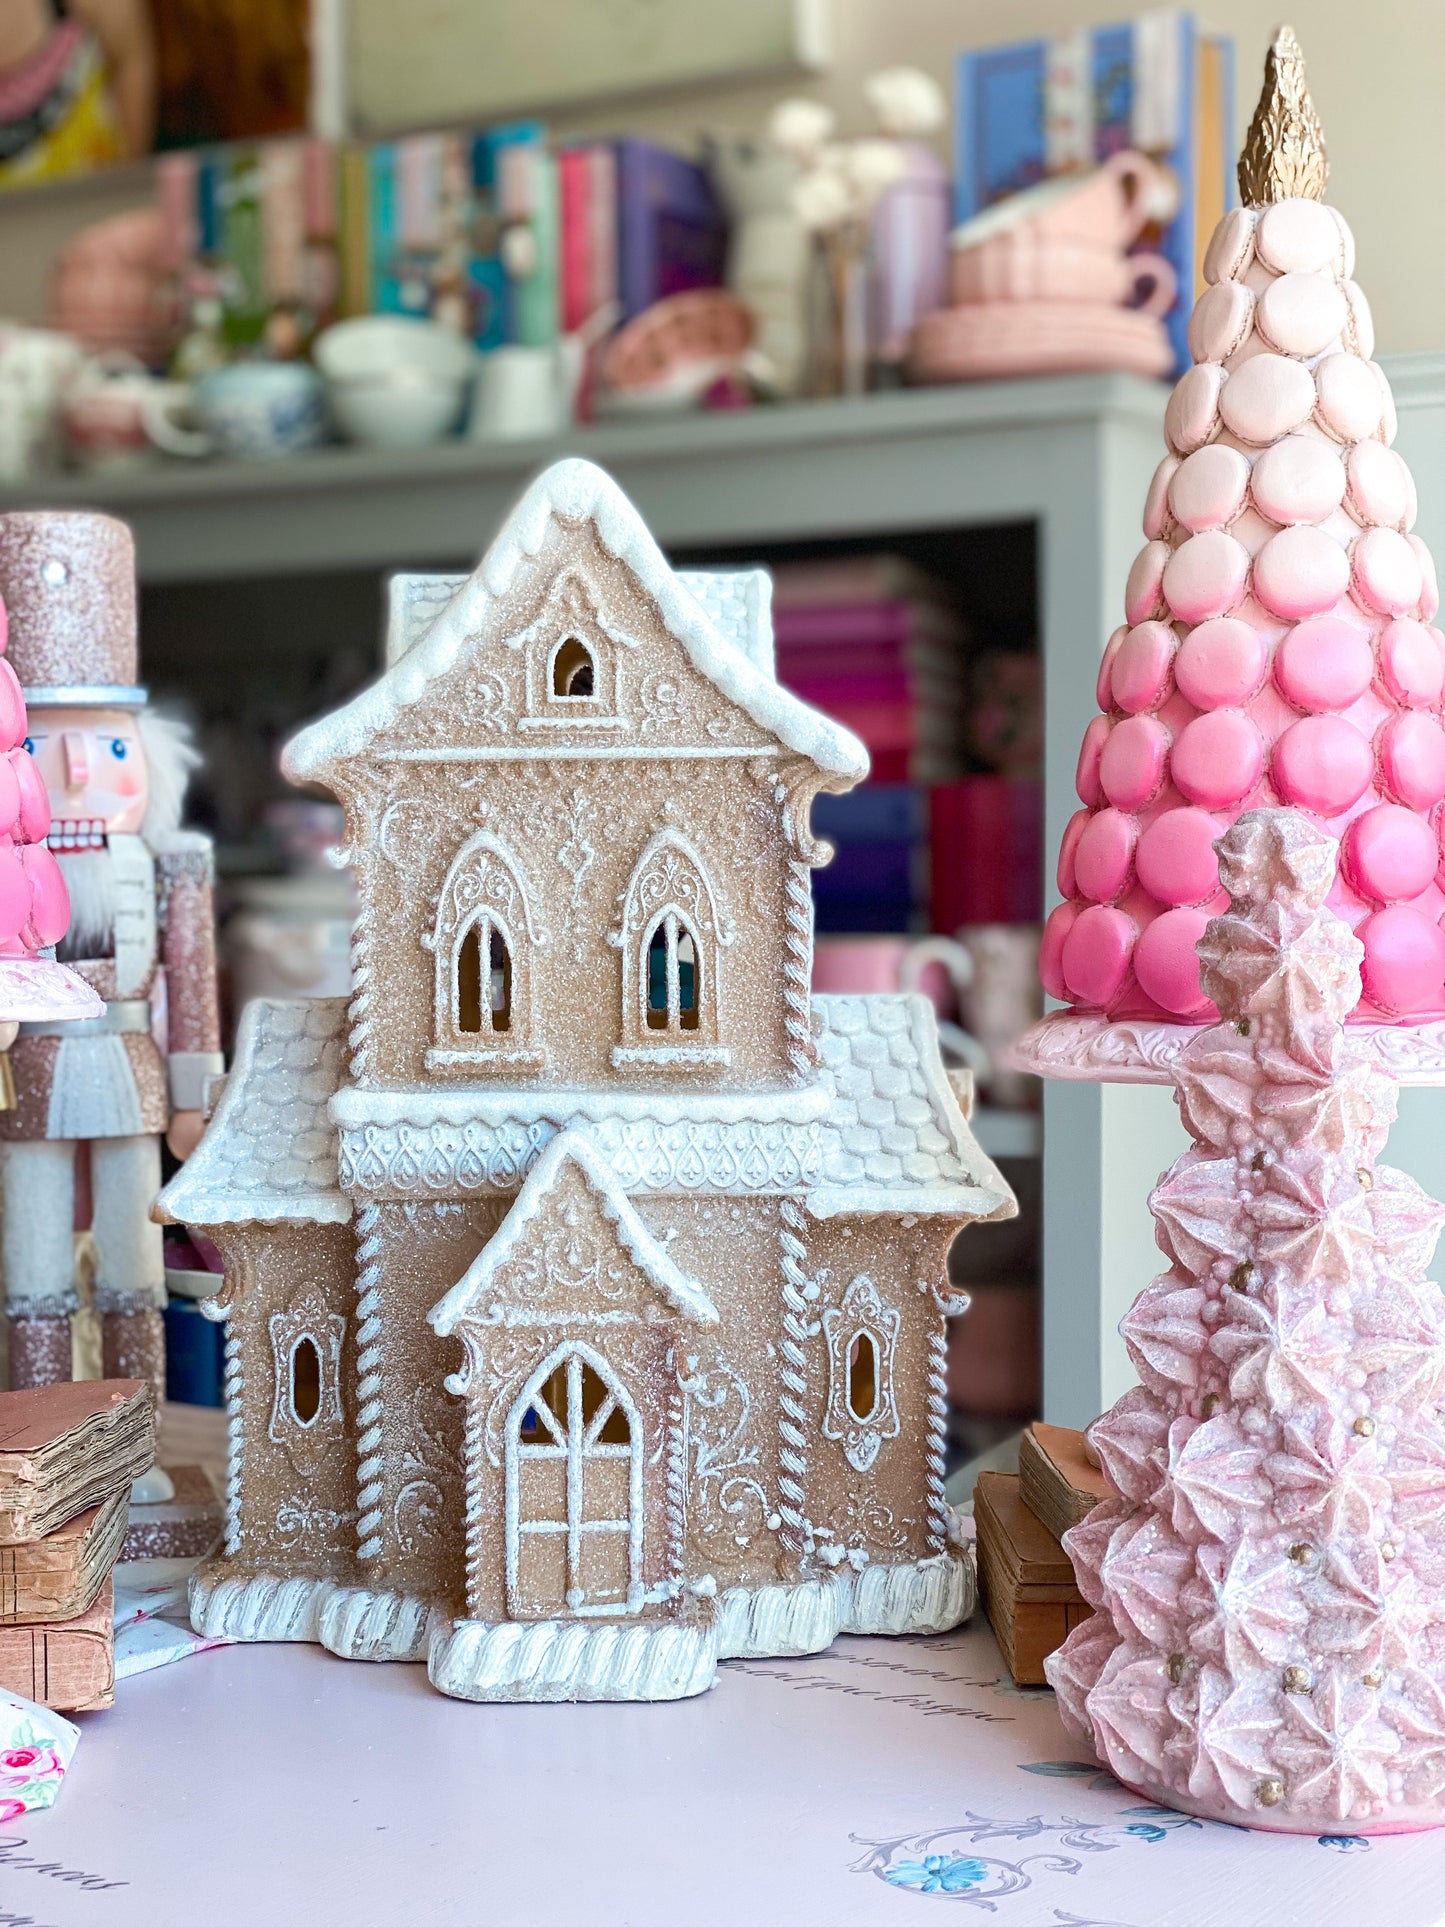 Neutral Gingerbread Mansion with ornate icing design